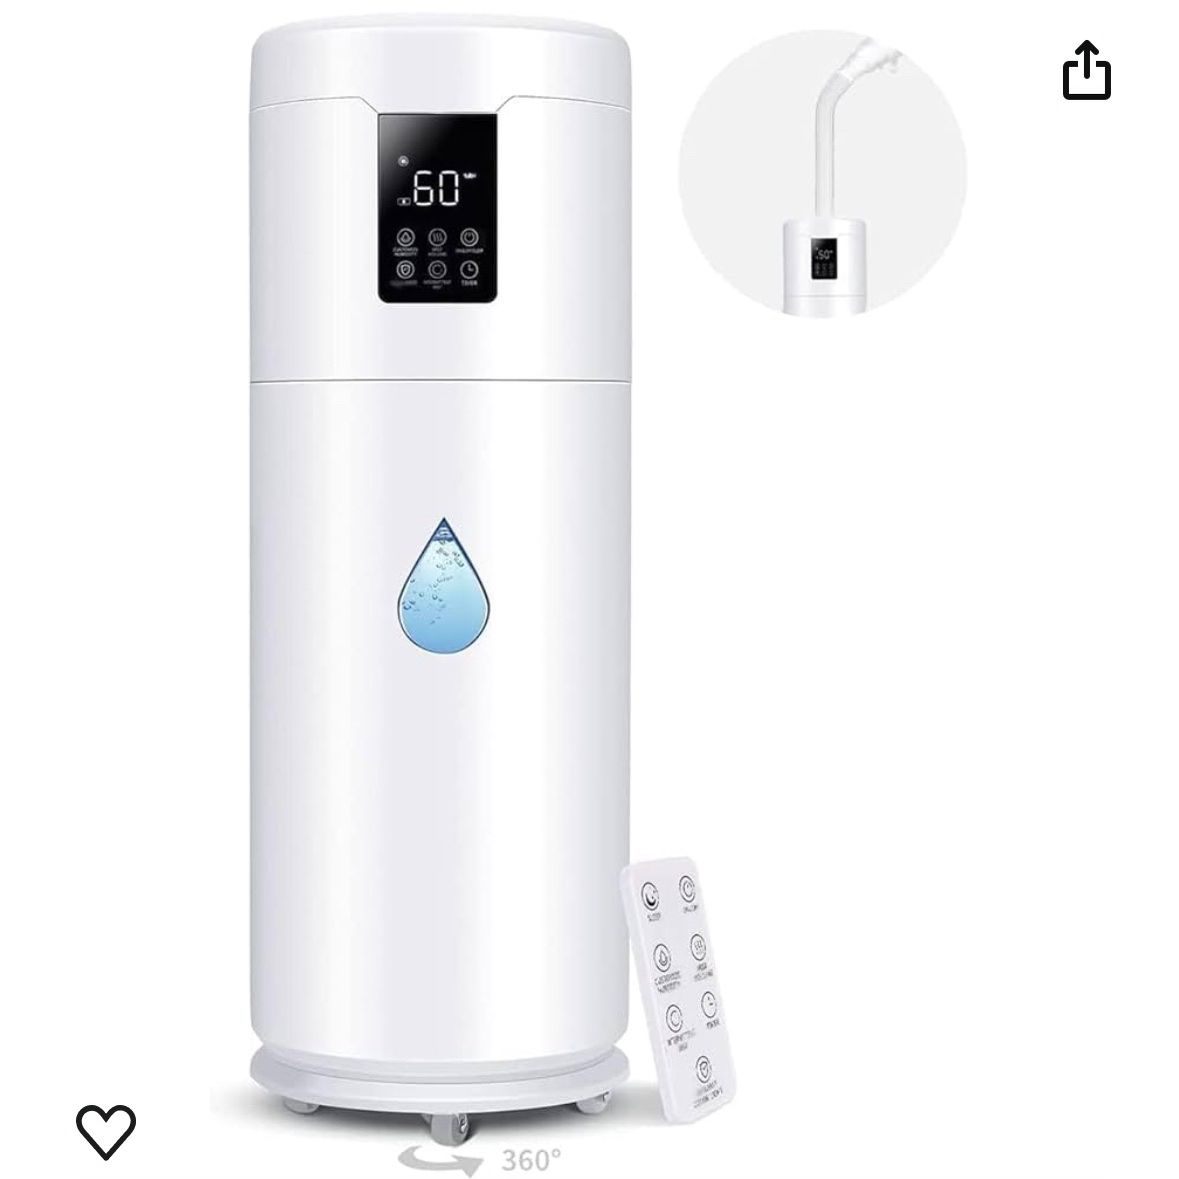 Humidifiers for Large Room Home Bedroom 2000 sq.ft. 17L/4.5Gal Large Humidifier with Extension Tube & 4 Speed Mist,Top Fill Wholehouse Humidifier with